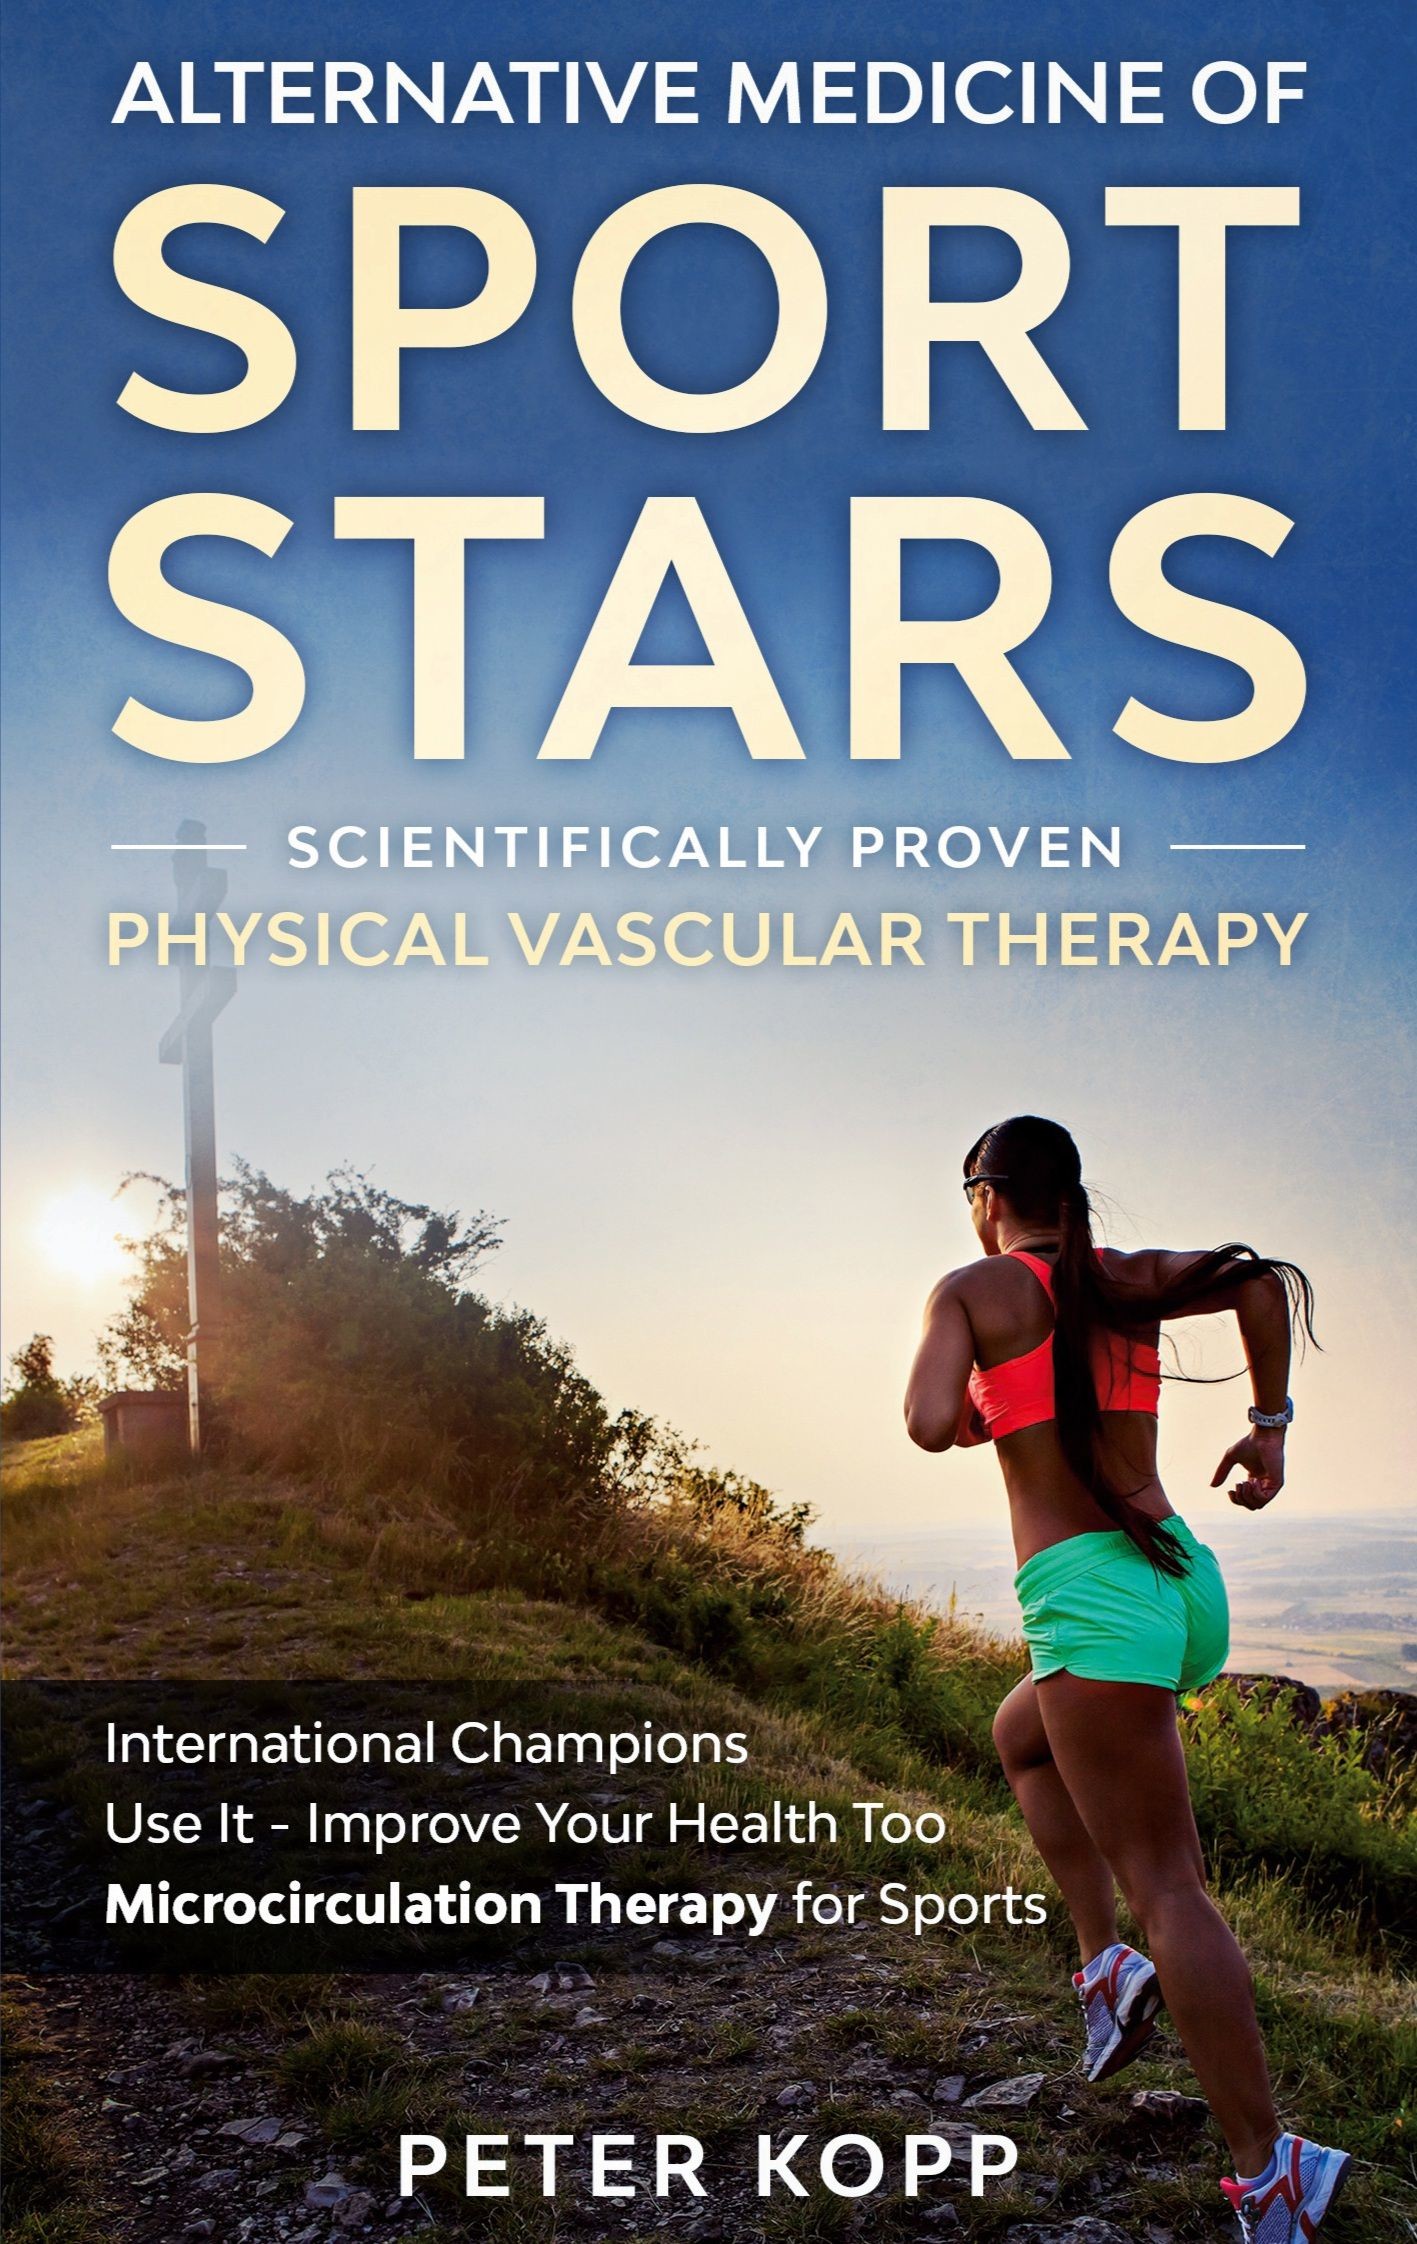 Alternative Medicine of Sport Stars: Scientifically proven Physical Vascular Therapy